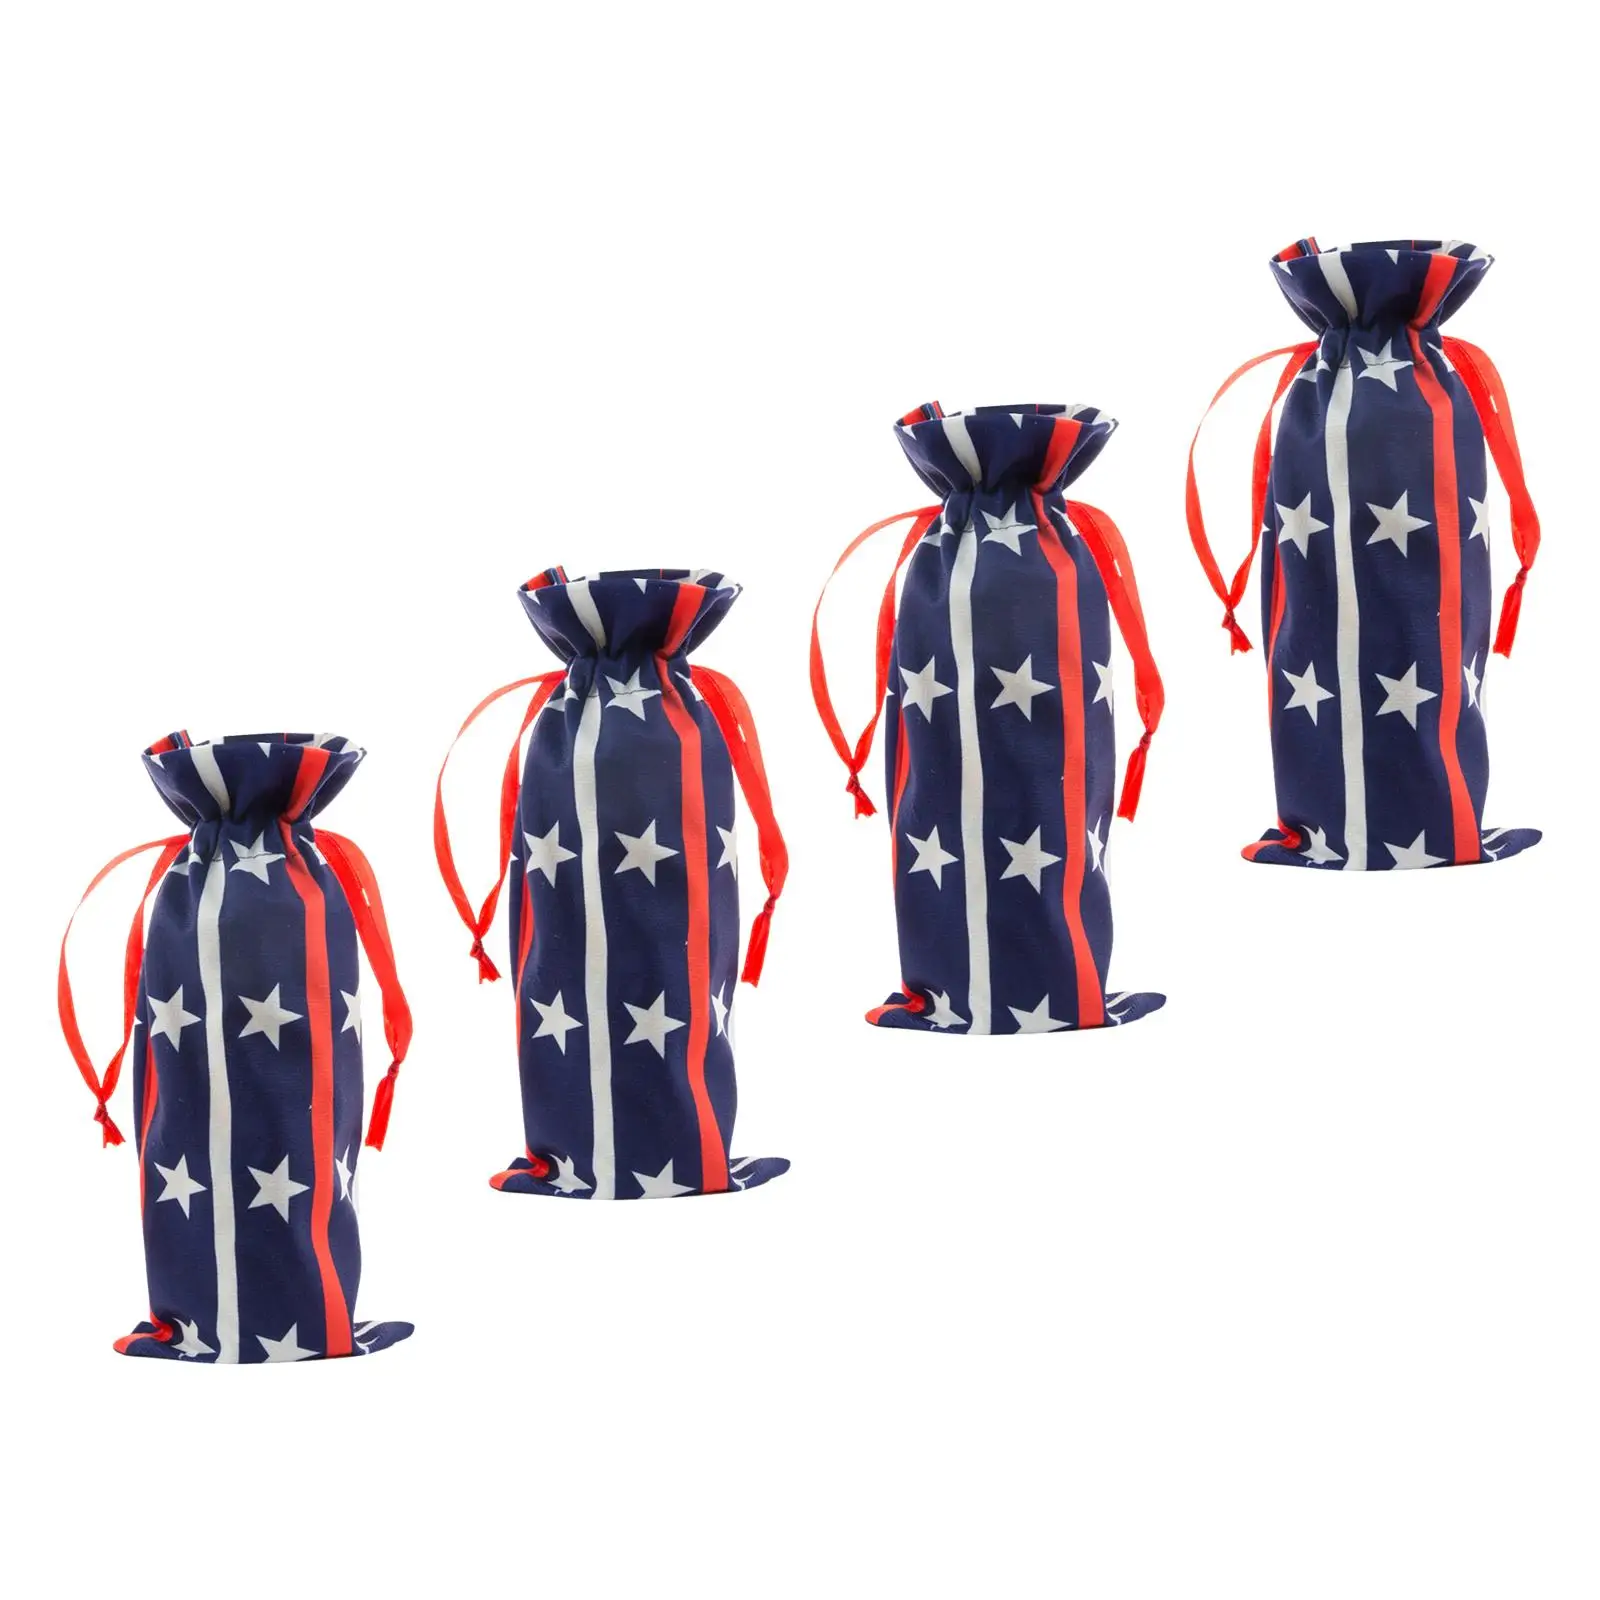 4x Drawstring Wine Bottle Bags Wine Accessory 4TH of July Wine Gift Bags